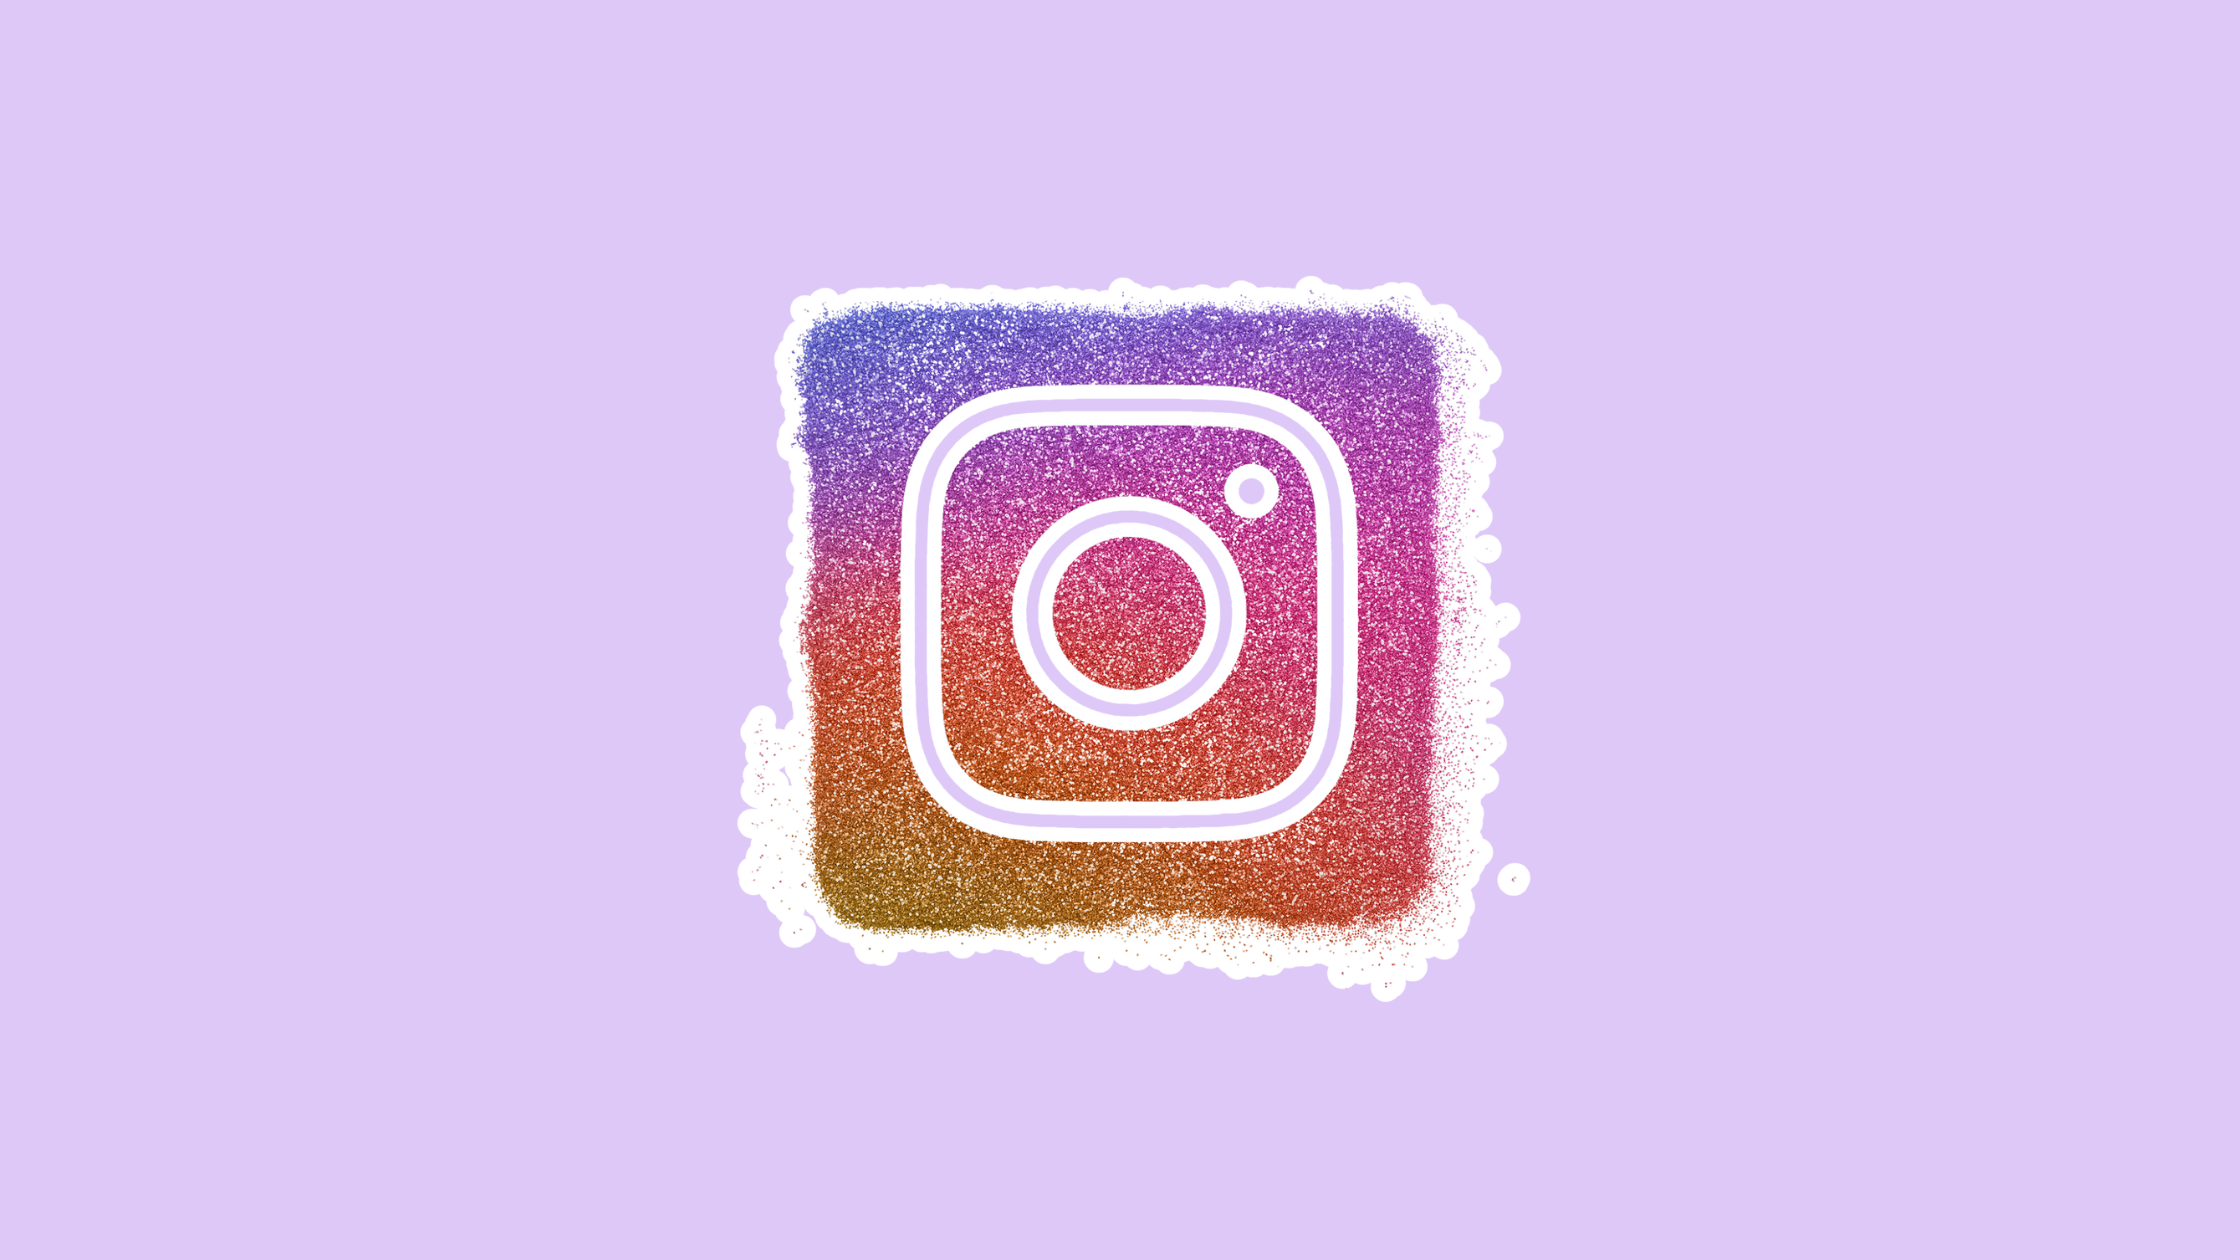 Instagram launches 'Inspiration' Tool